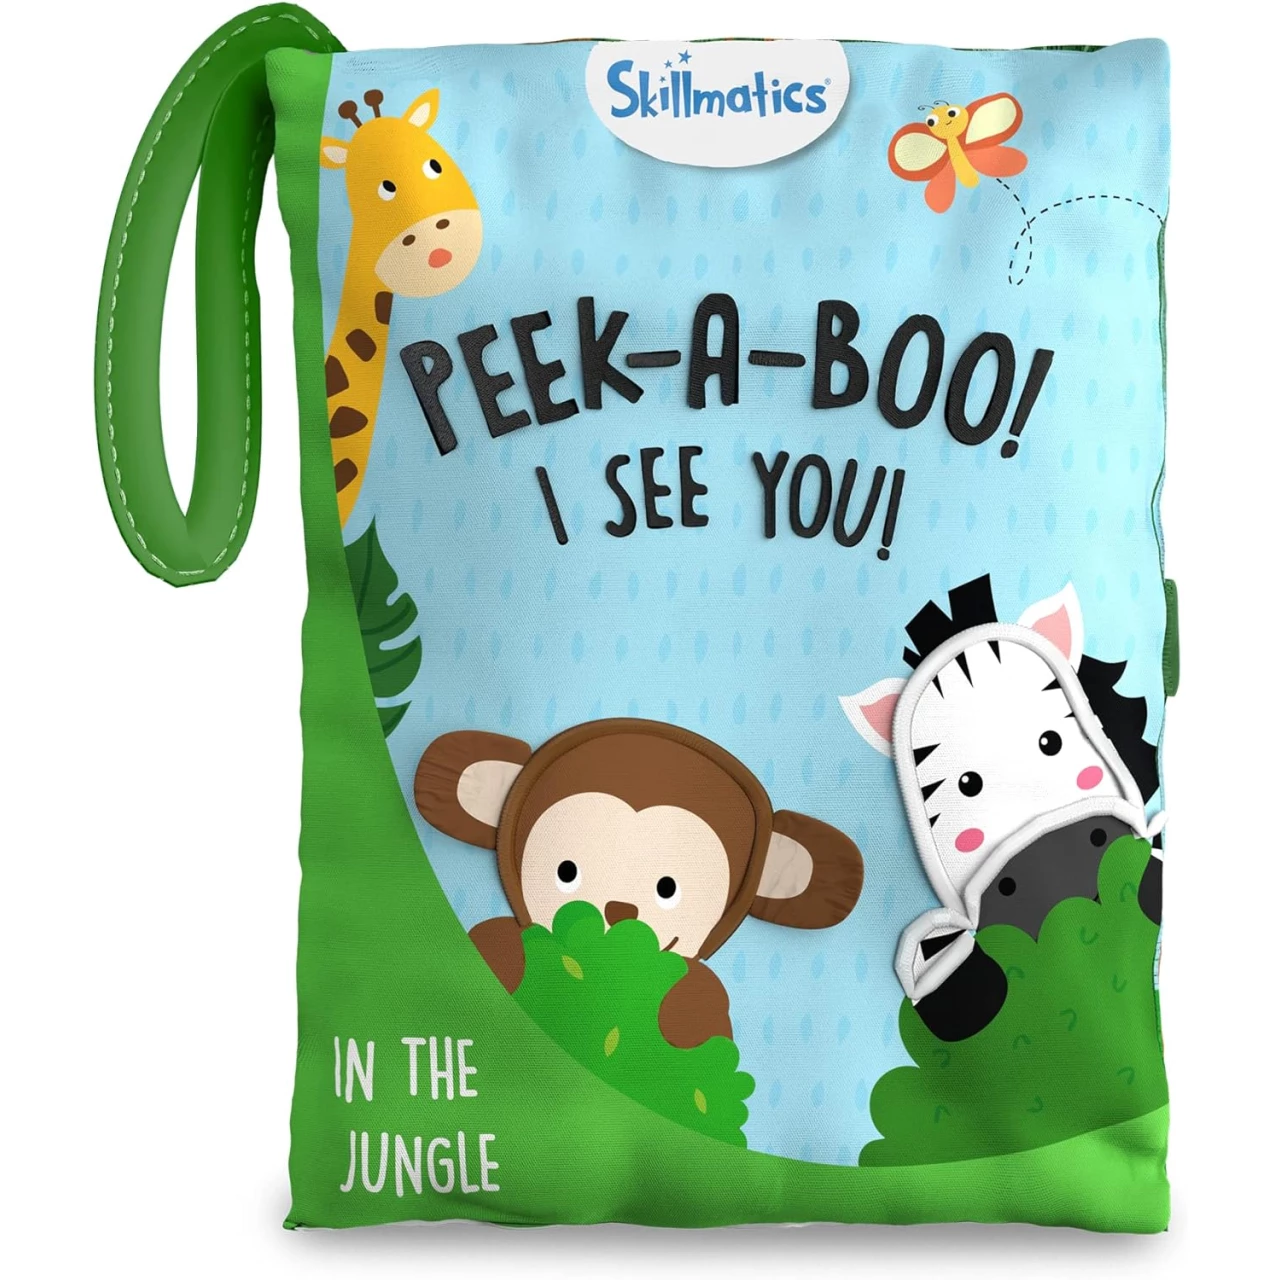 Skillmatics Peek-A-Boo Jungle Book - Soft Cloth Book for Baby, Infant &amp; Toddler Toys, Crinkle Pages for Sensory Play, Gifts for Ages 6 Months and Up